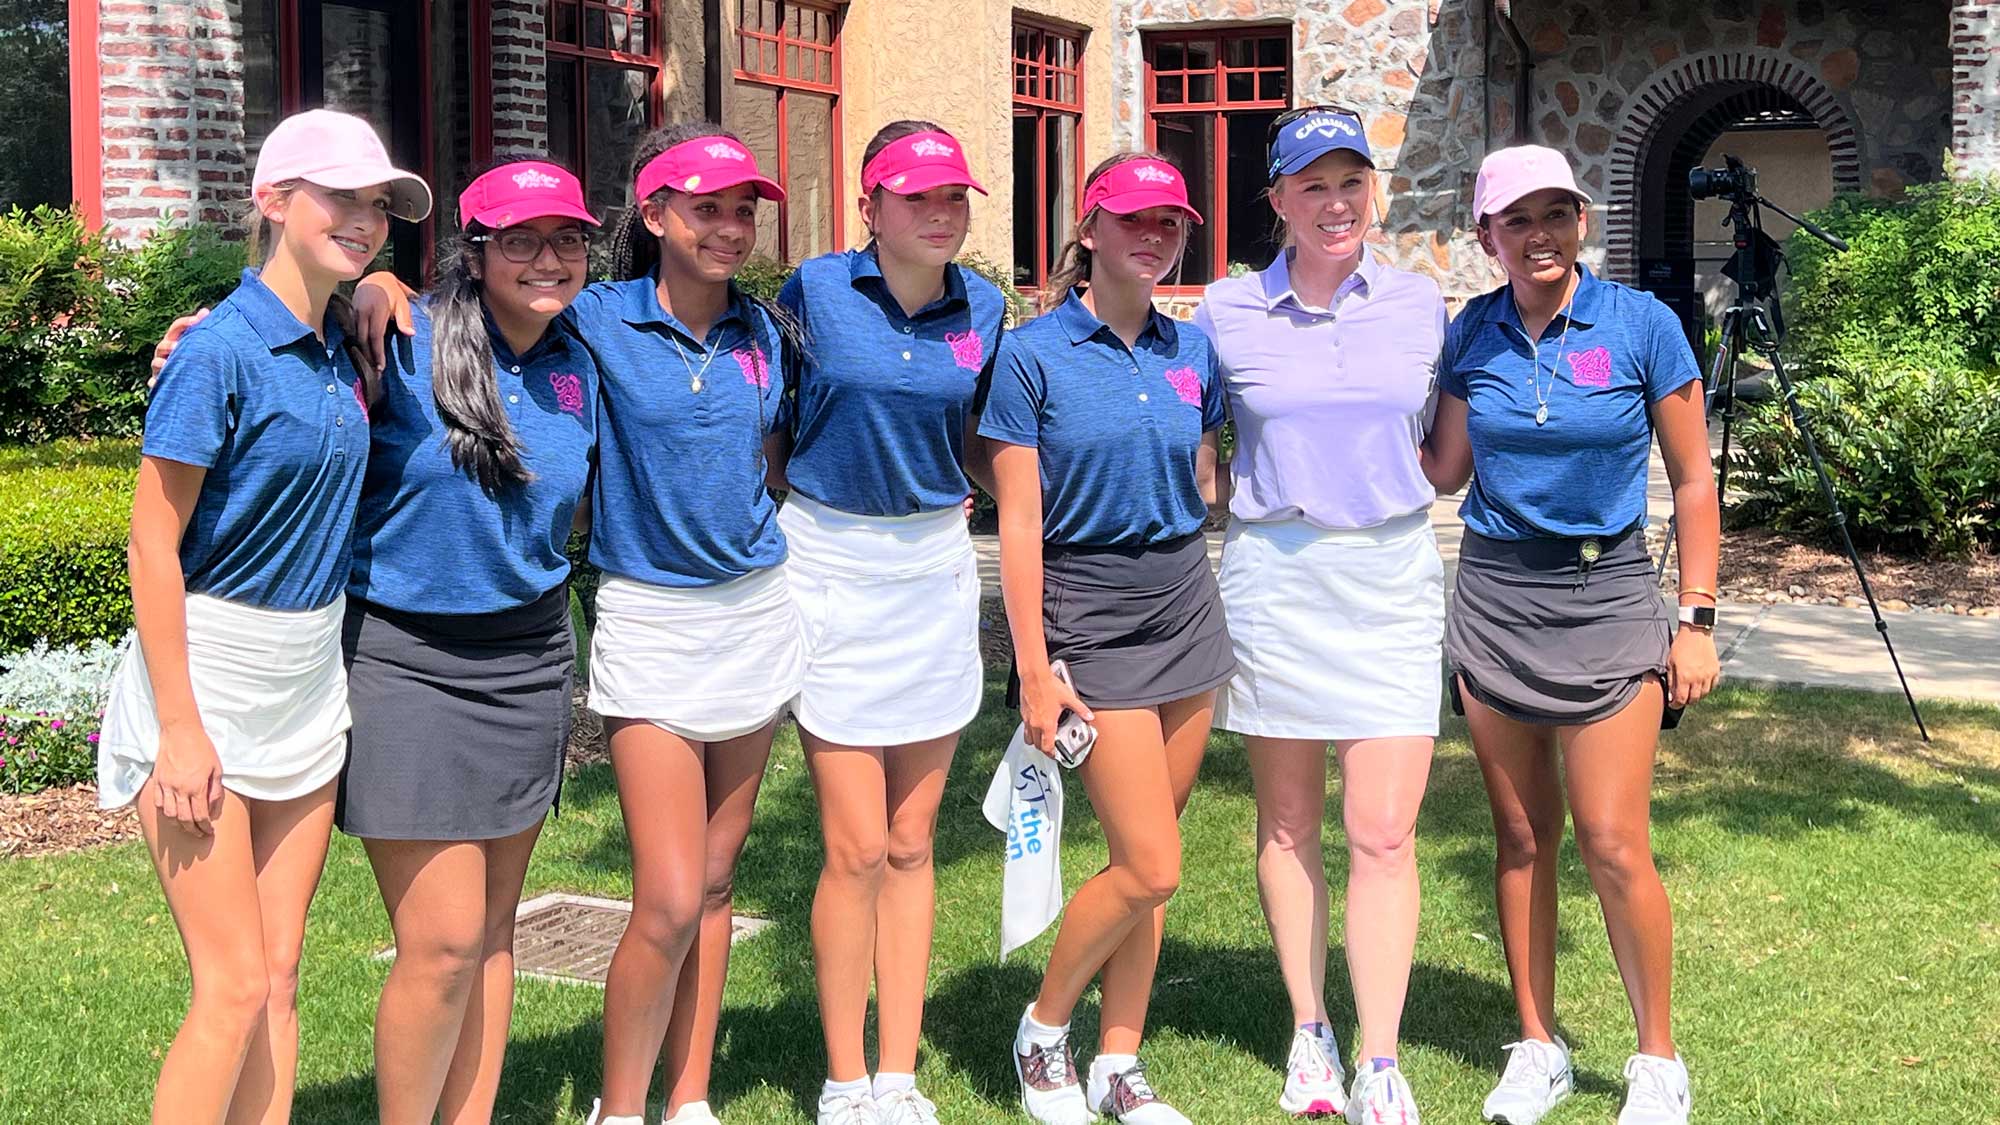 Players with Morgan Pressel